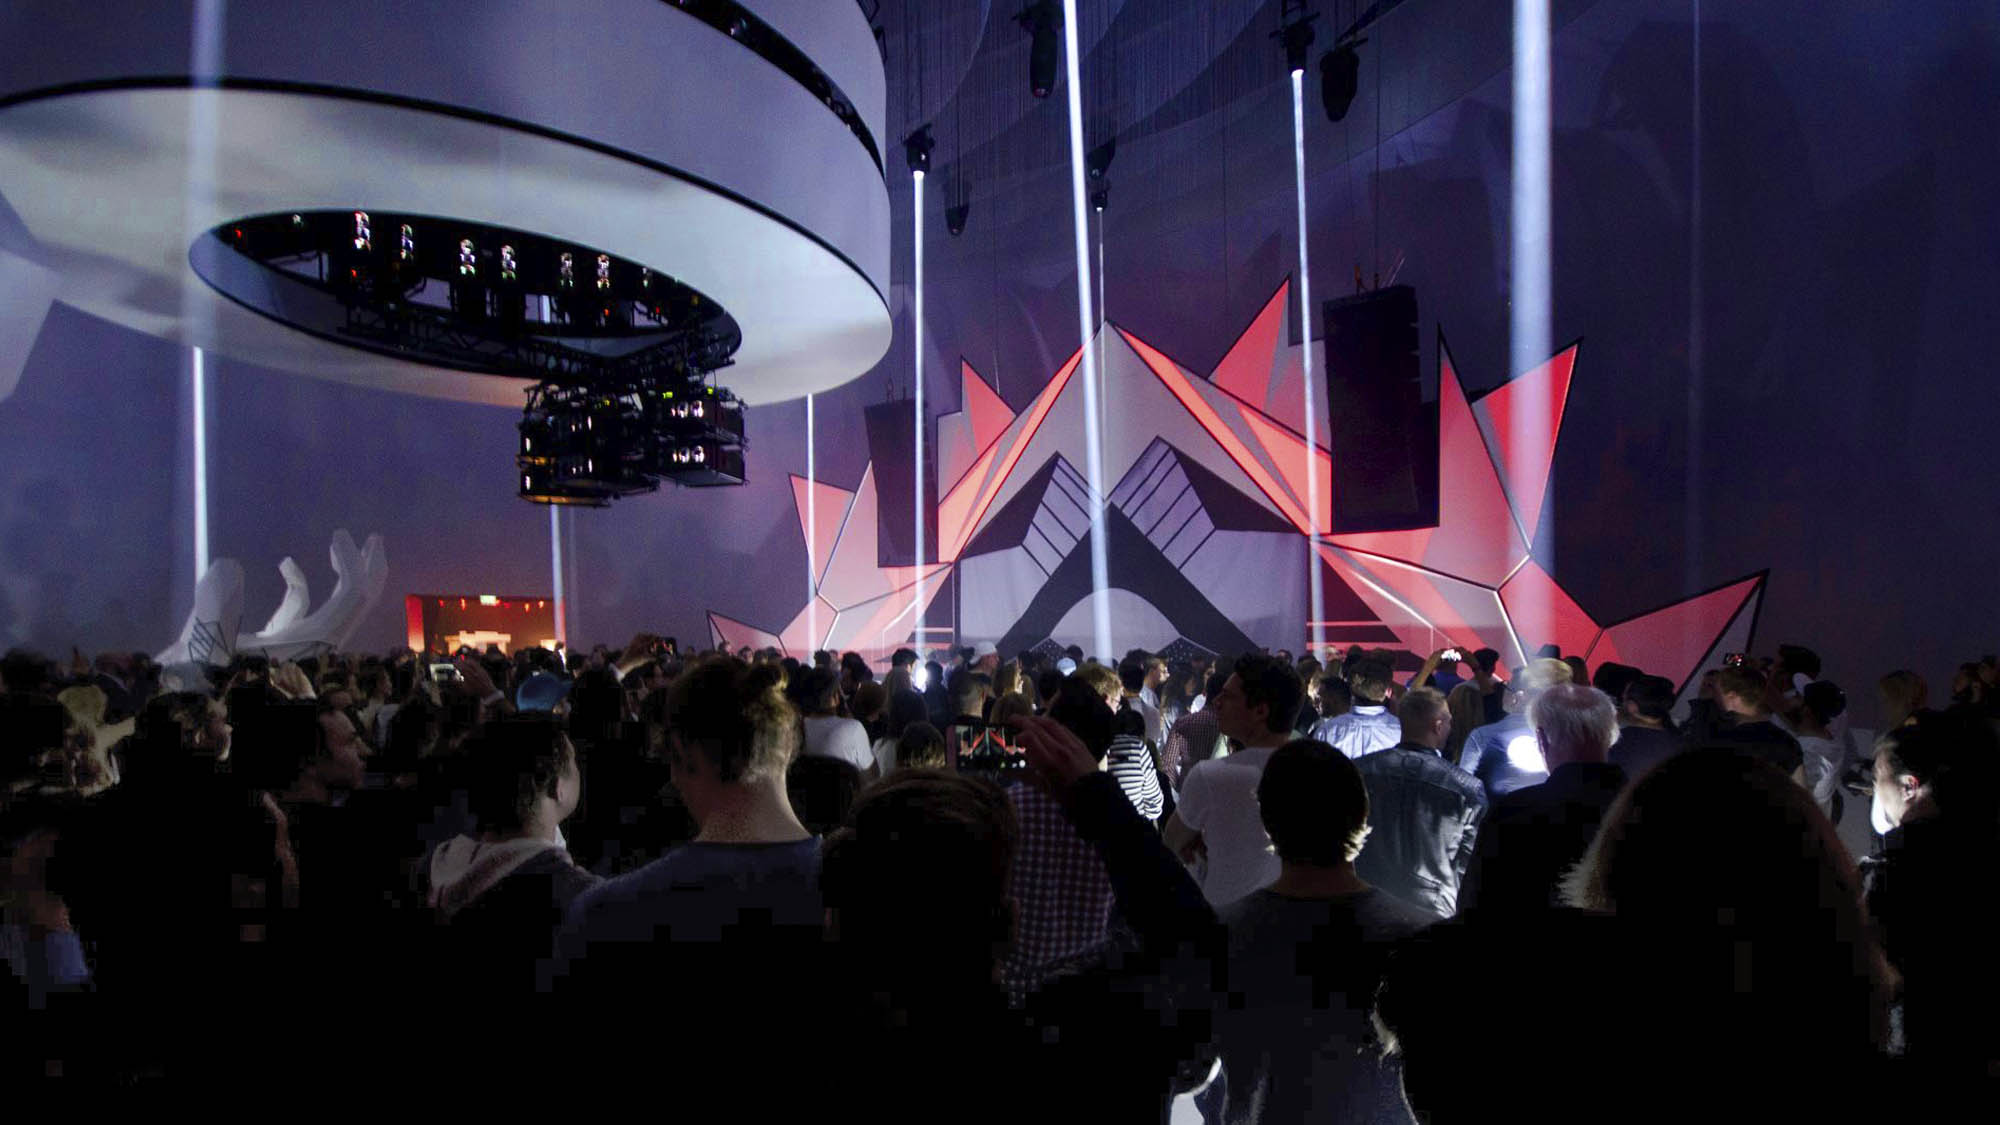 philipp frank, fulldome mapping show, 360, immersive art, installation, new media art, projection mapping, visuals